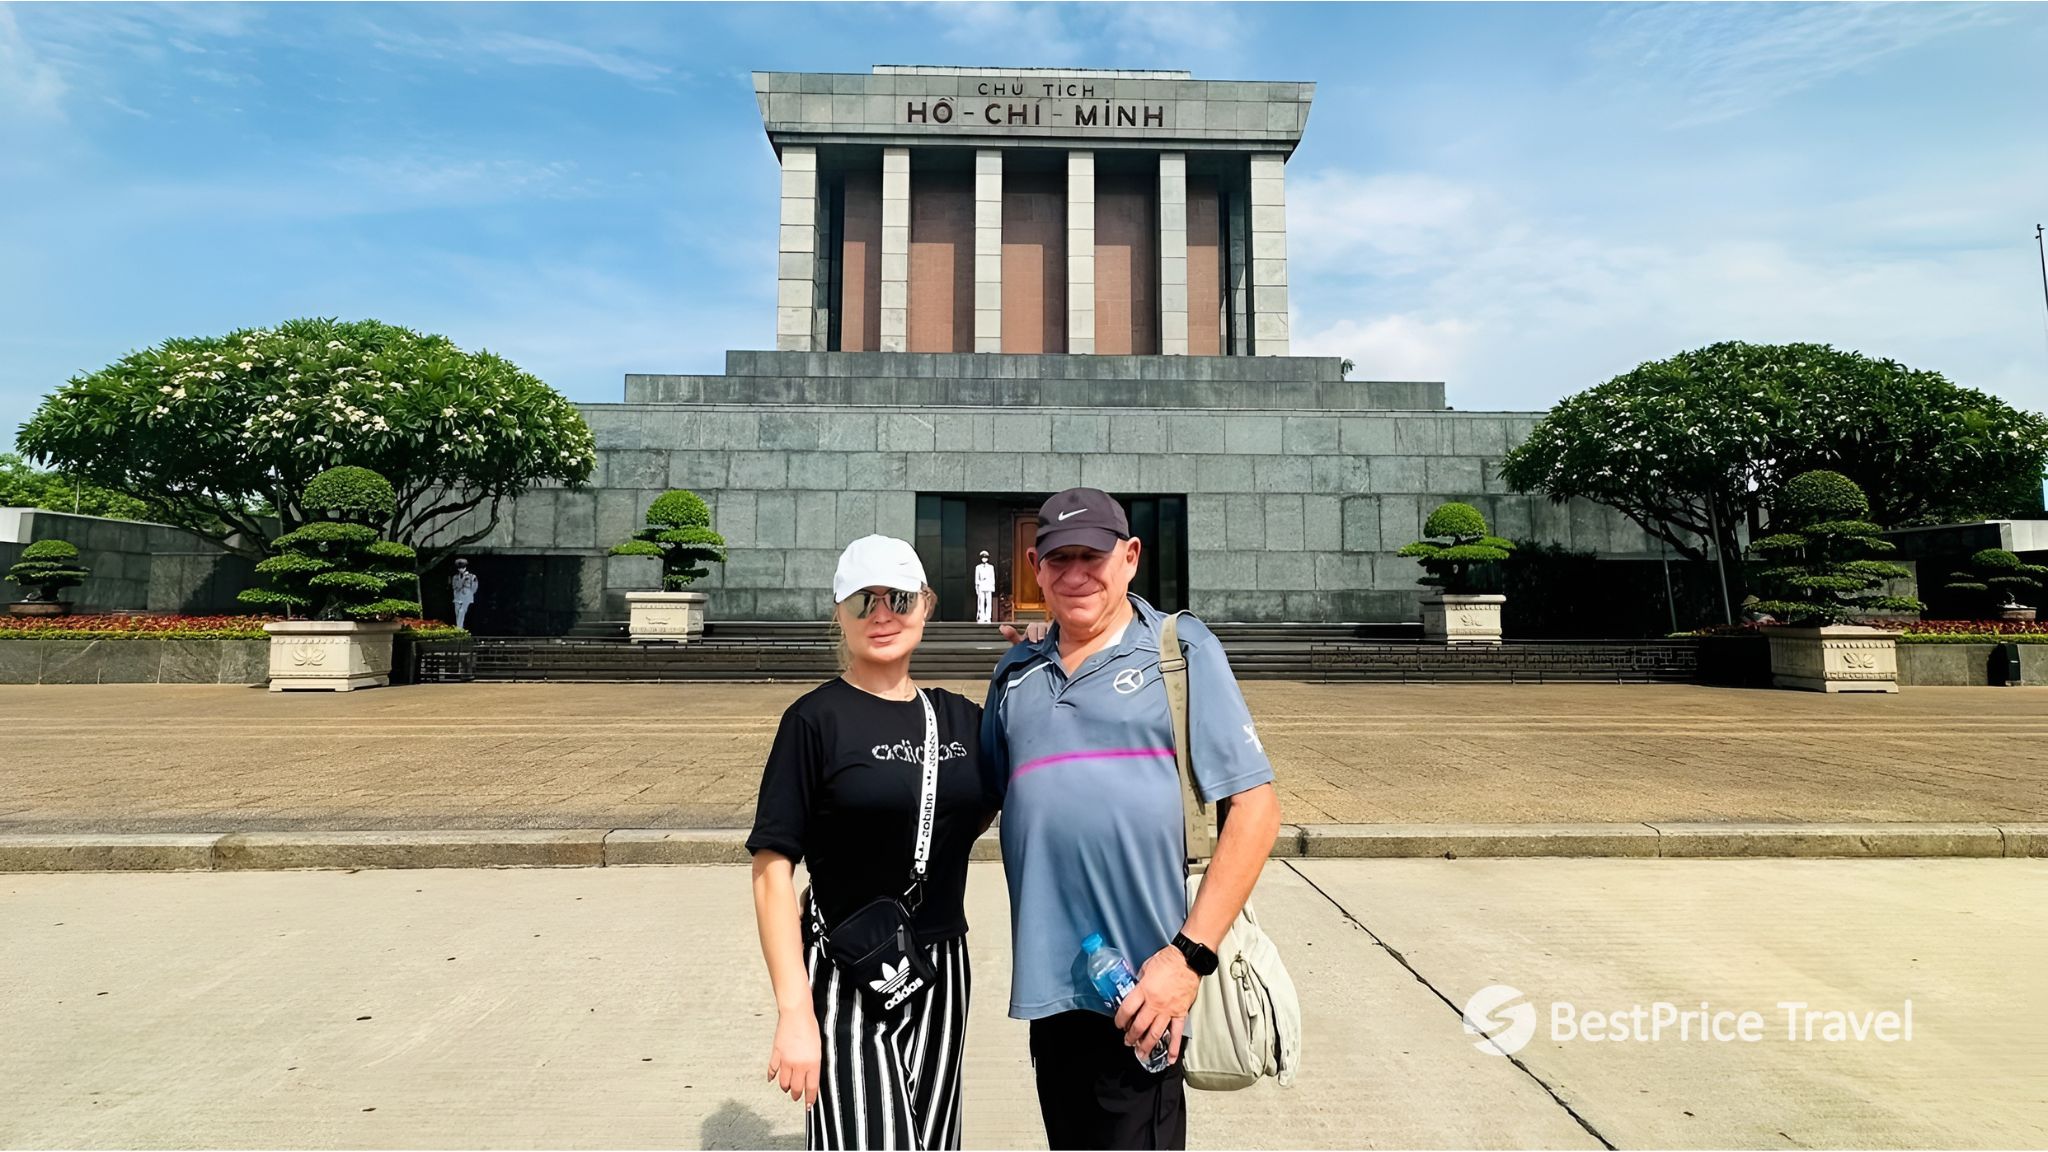 Day 8 Pay A Visit To Ho Chi Minh Mausoleum